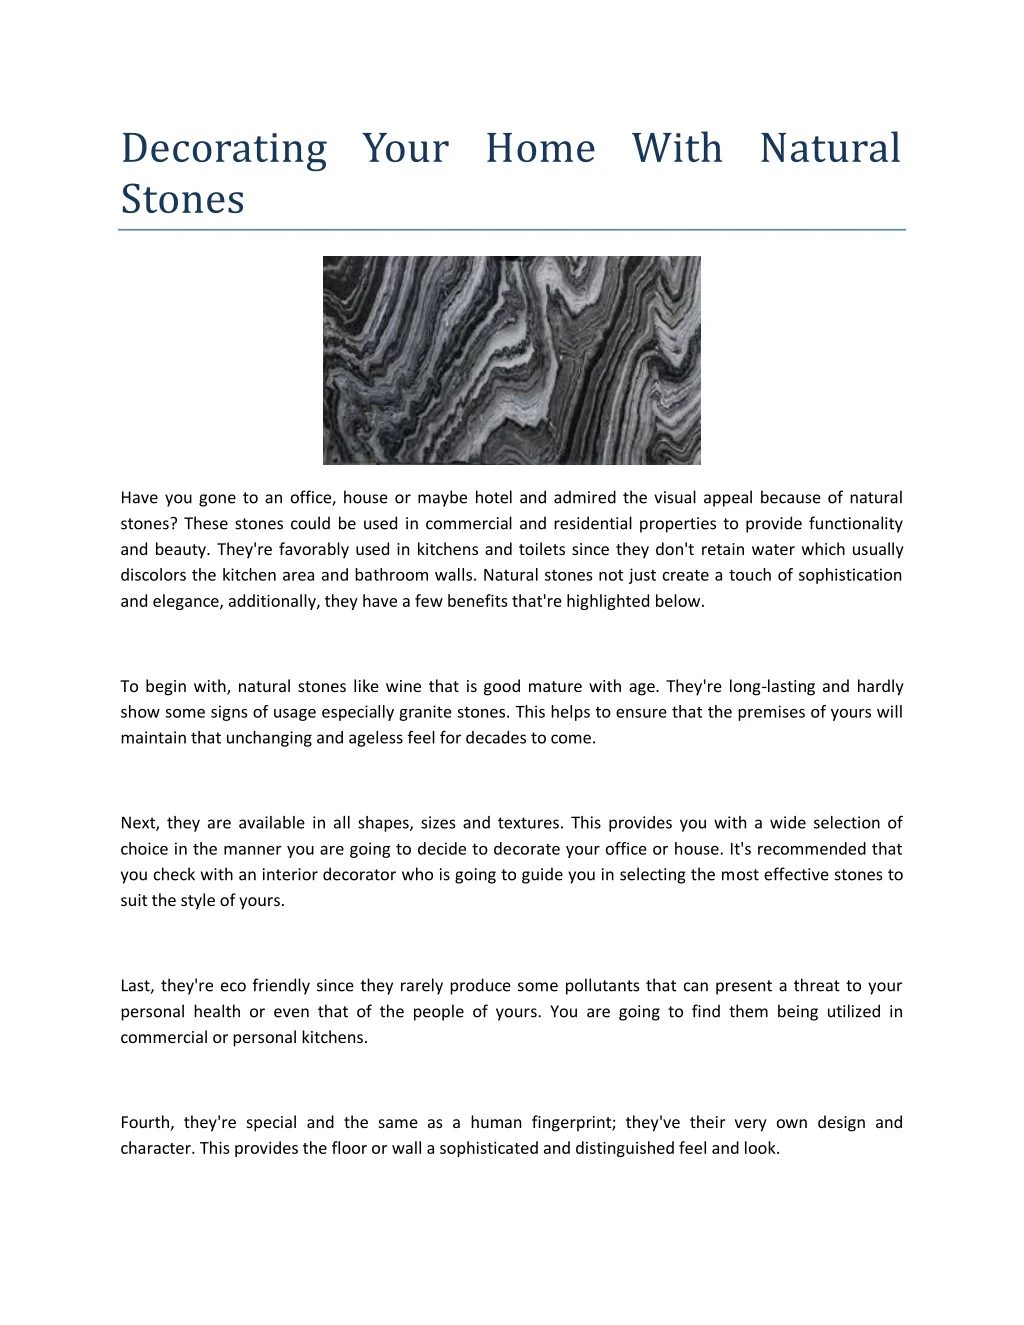 decorating your home with natural stones